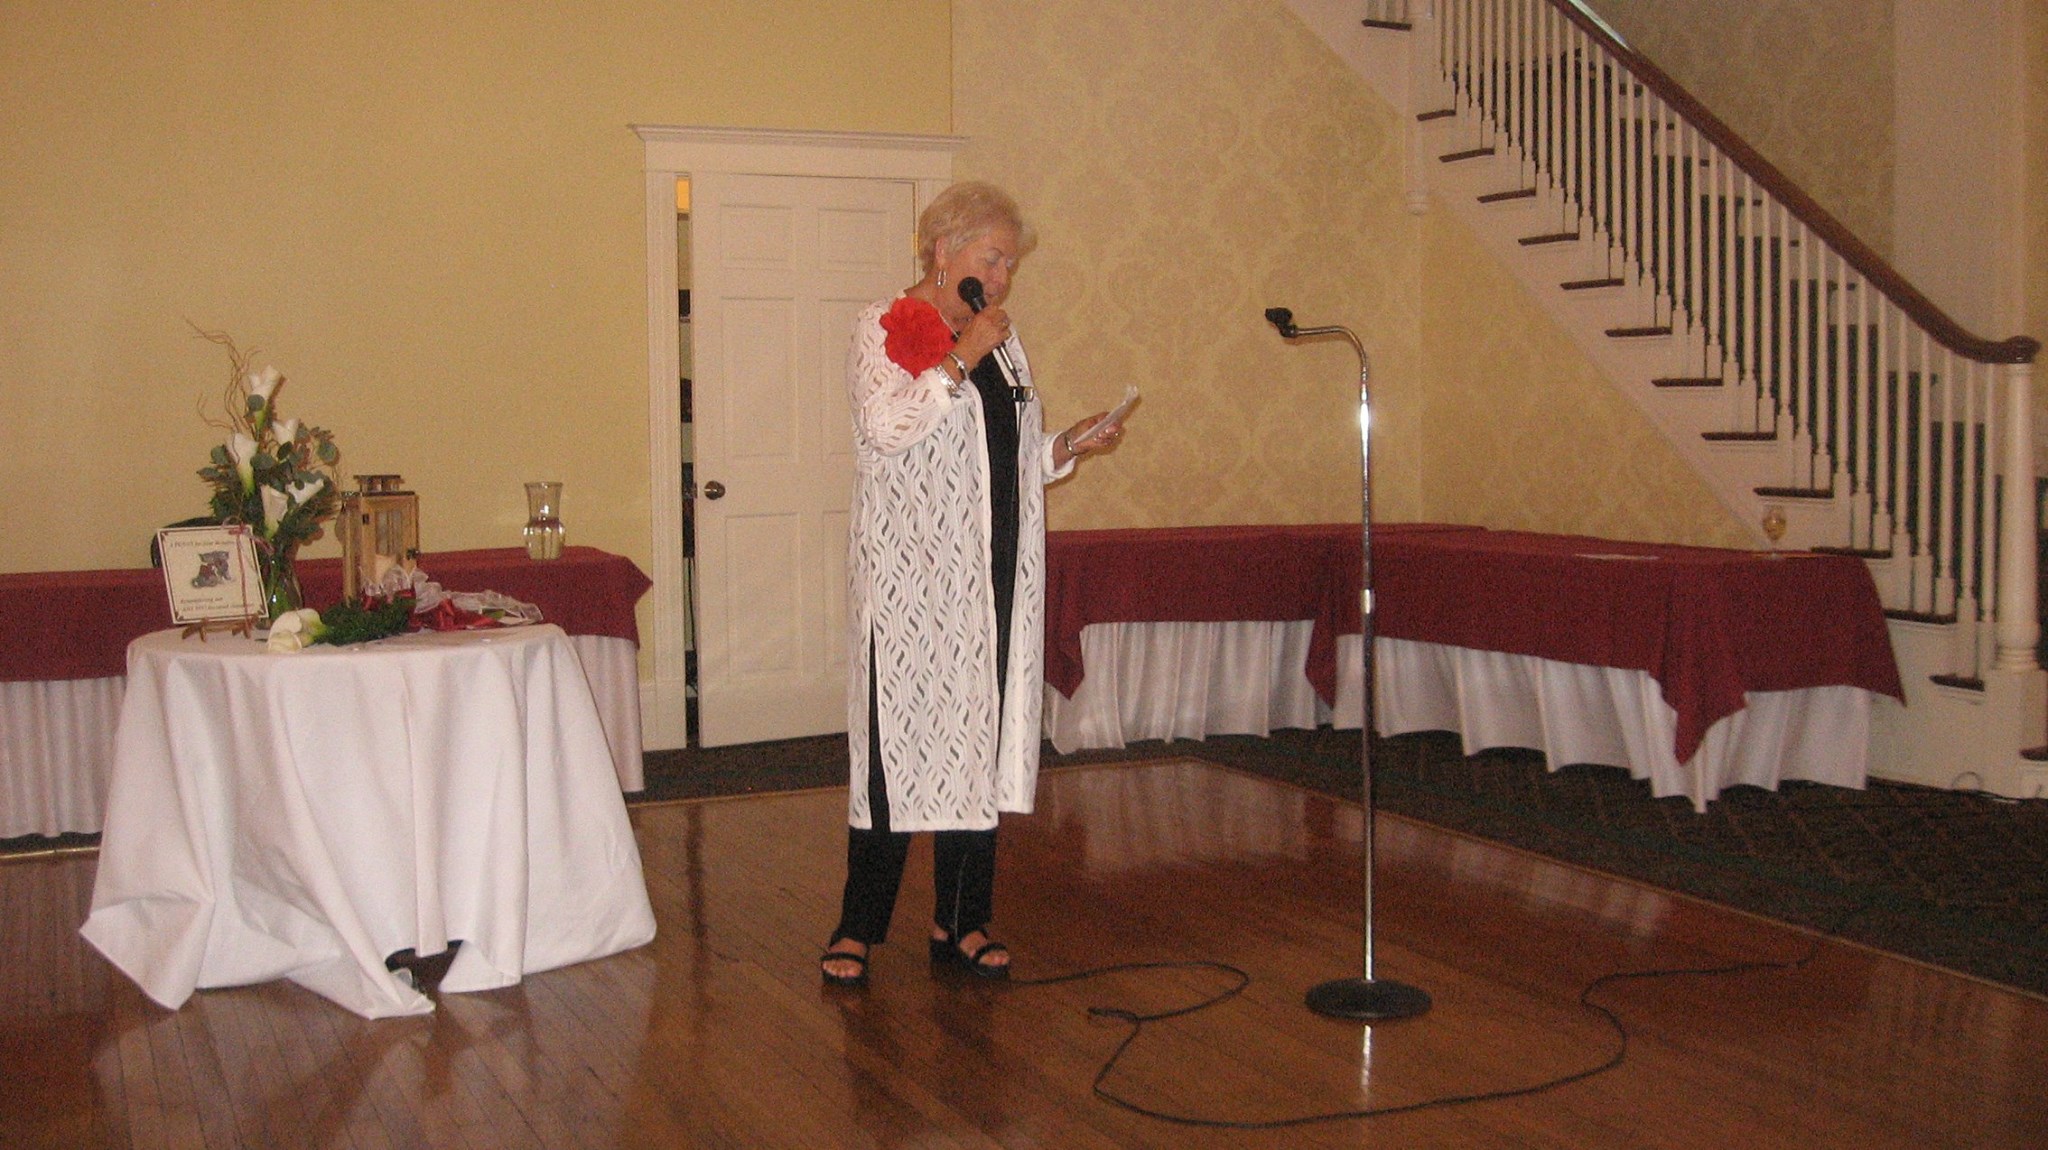 JOSETTE KINNER GIBSON WAS OUR CAPABLE MISTRESS OF CEREMONIES DURING THE PROGRAM.